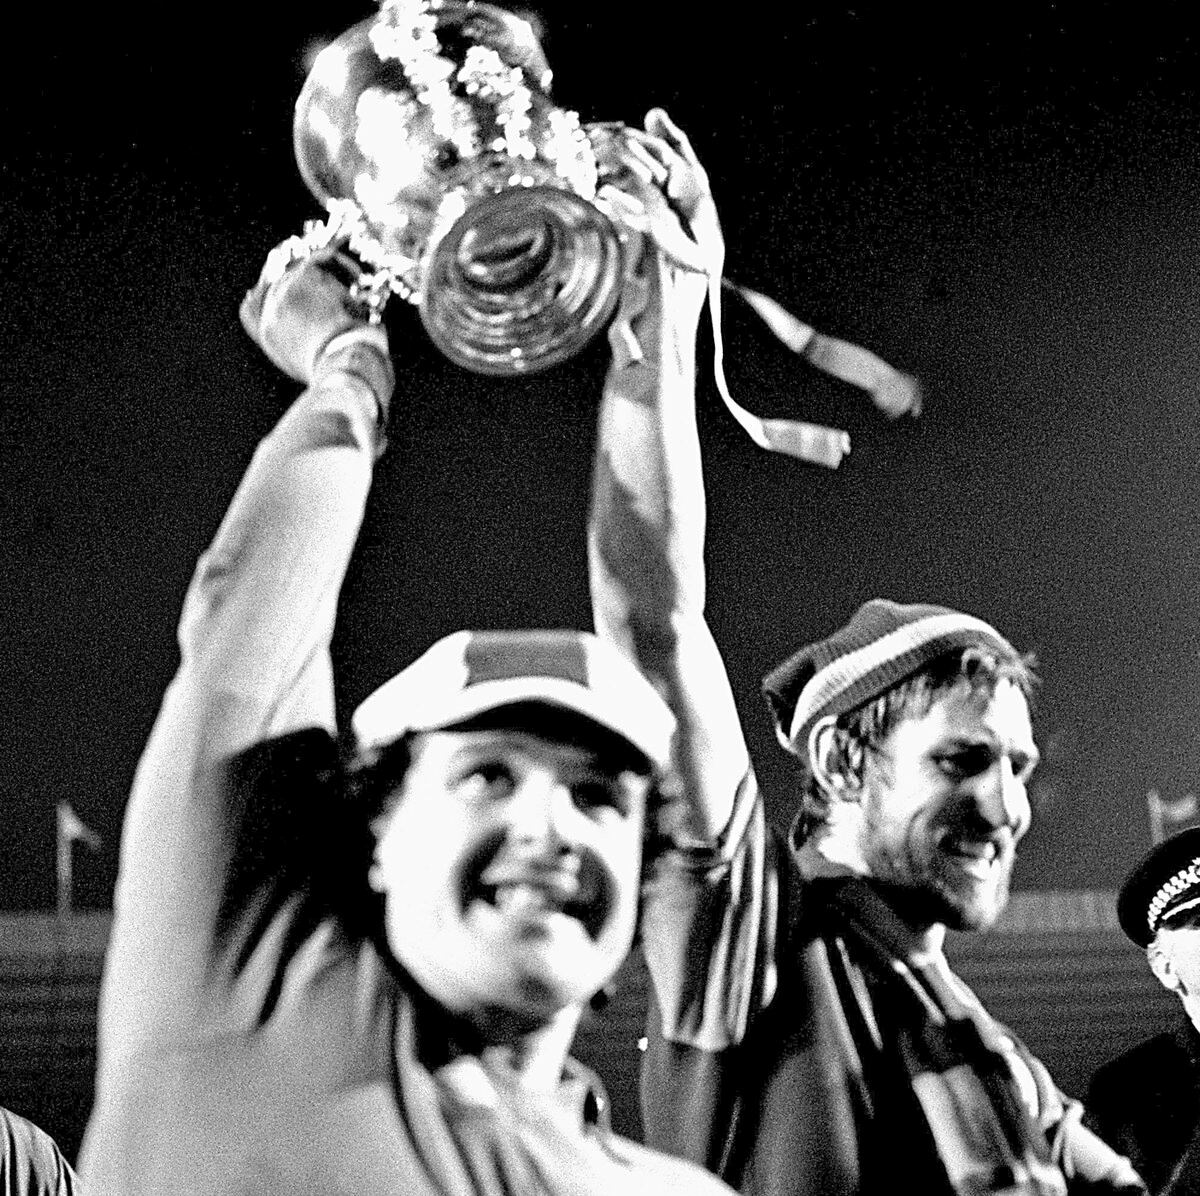 Lifting the League Cup in 1977 with Chris Nicholl, right, while at Villa